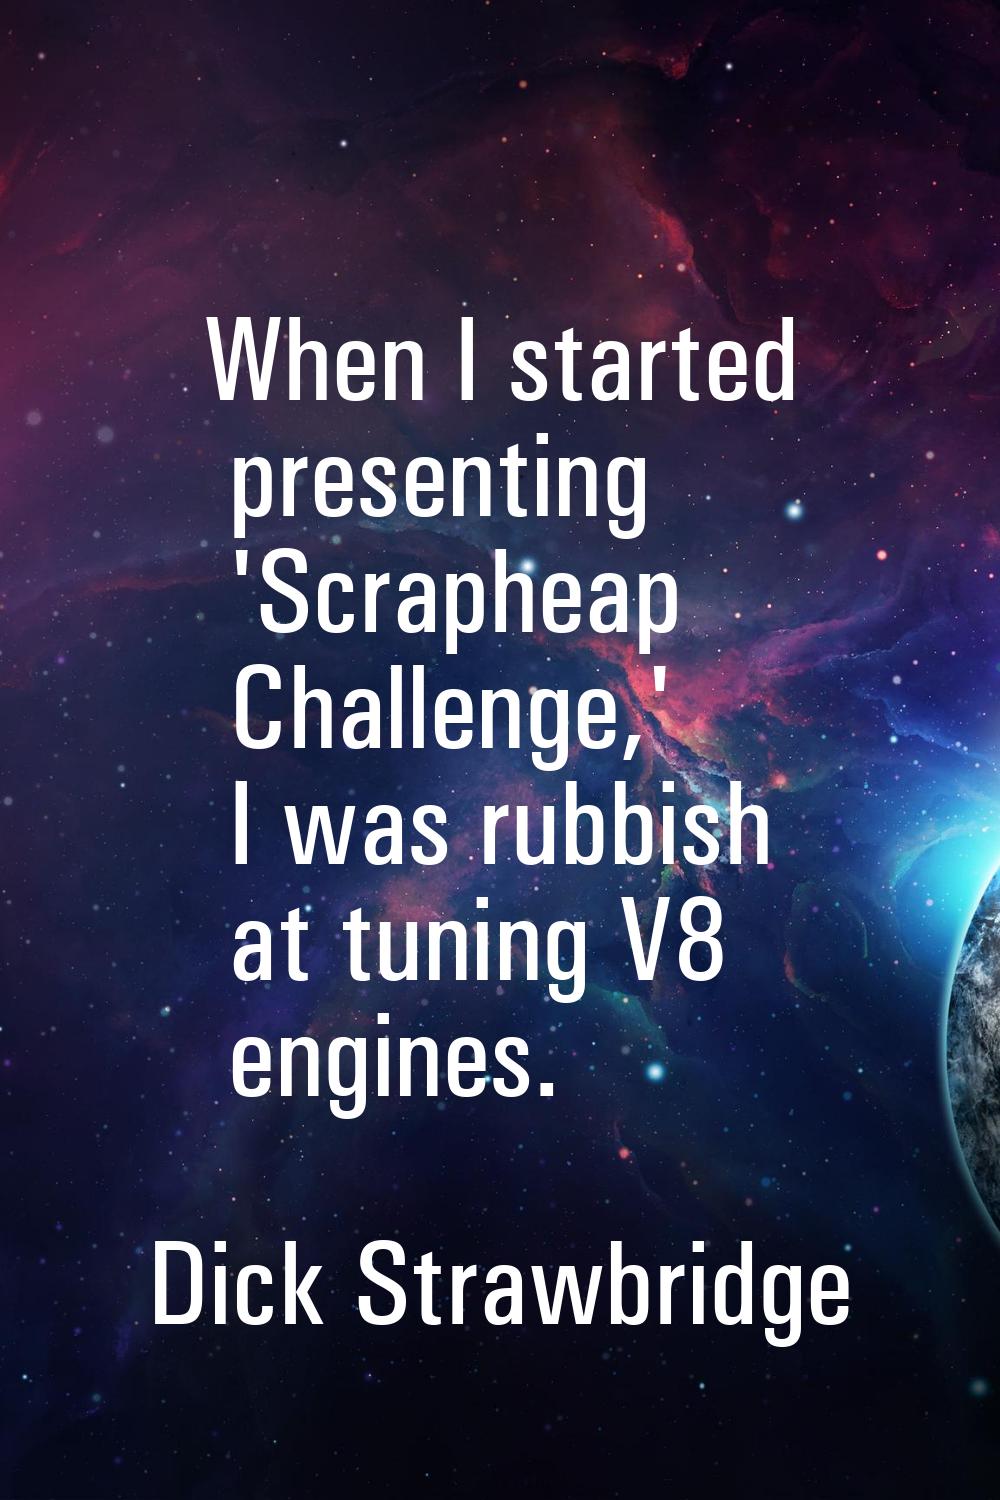 When I started presenting 'Scrapheap Challenge,' I was rubbish at tuning V8 engines.